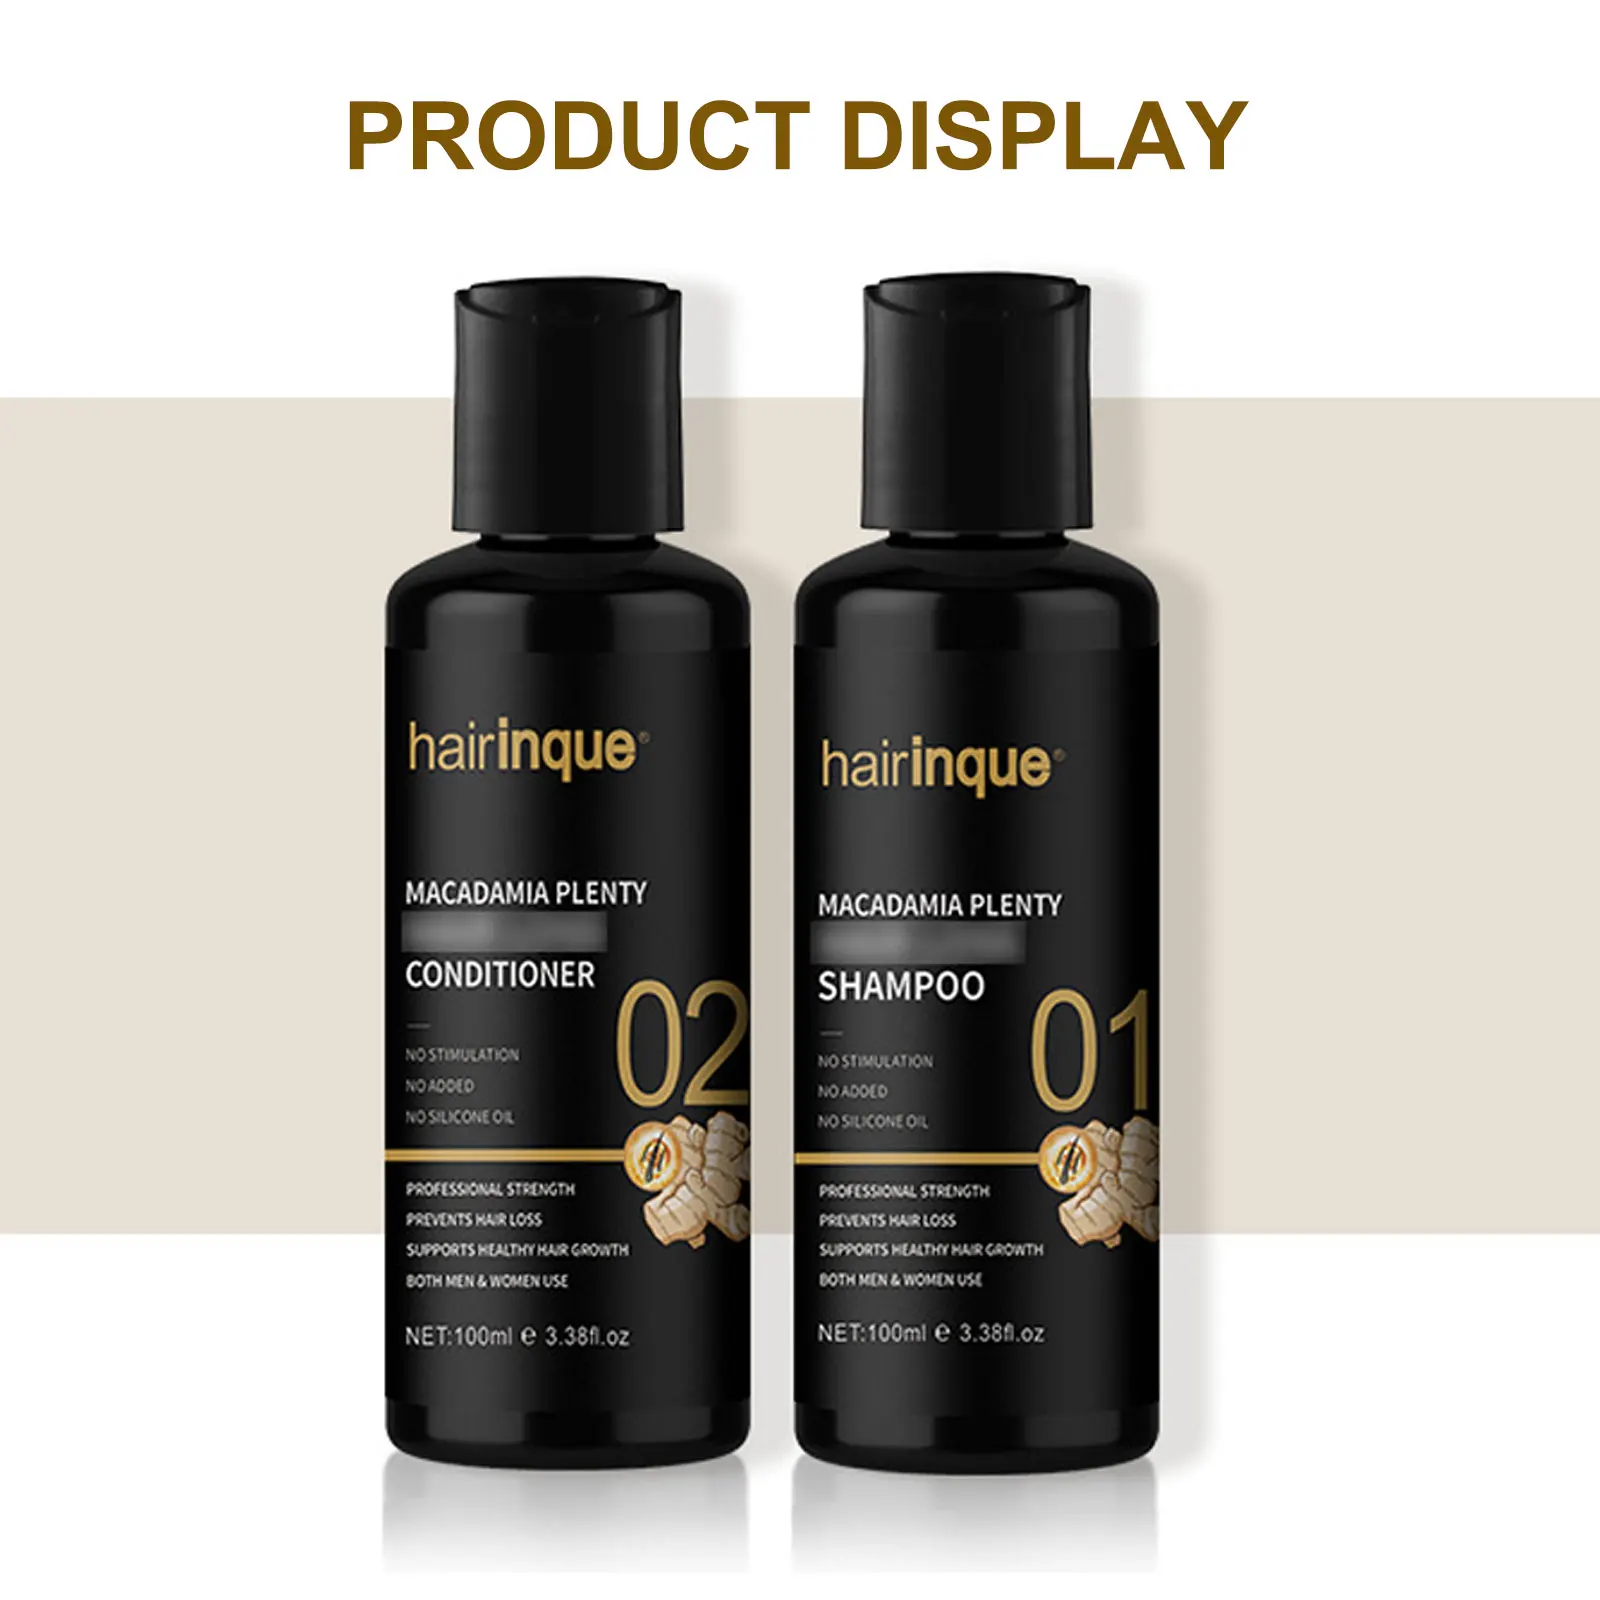 

Hair Growth Shampoo Conditioner Gift Set Thickener Anti Hair Loss Care Products Grow Hair Regrowth Treatment Serum Oil Men Women